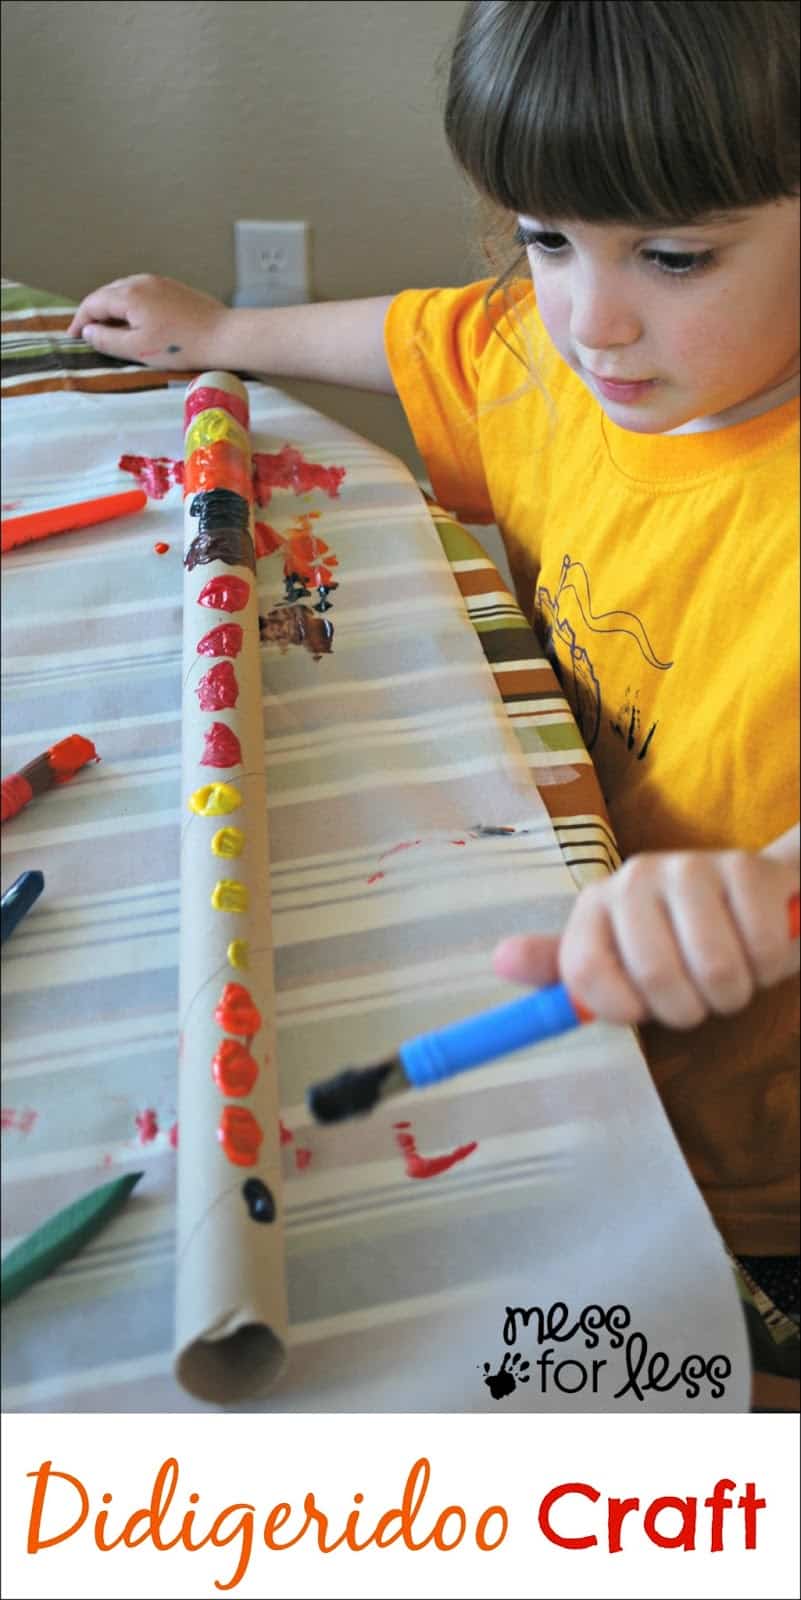 Didgeridoo crafts for kids - children can decorate and create a kids version of this Australian instrument #sponsored #galileocamps